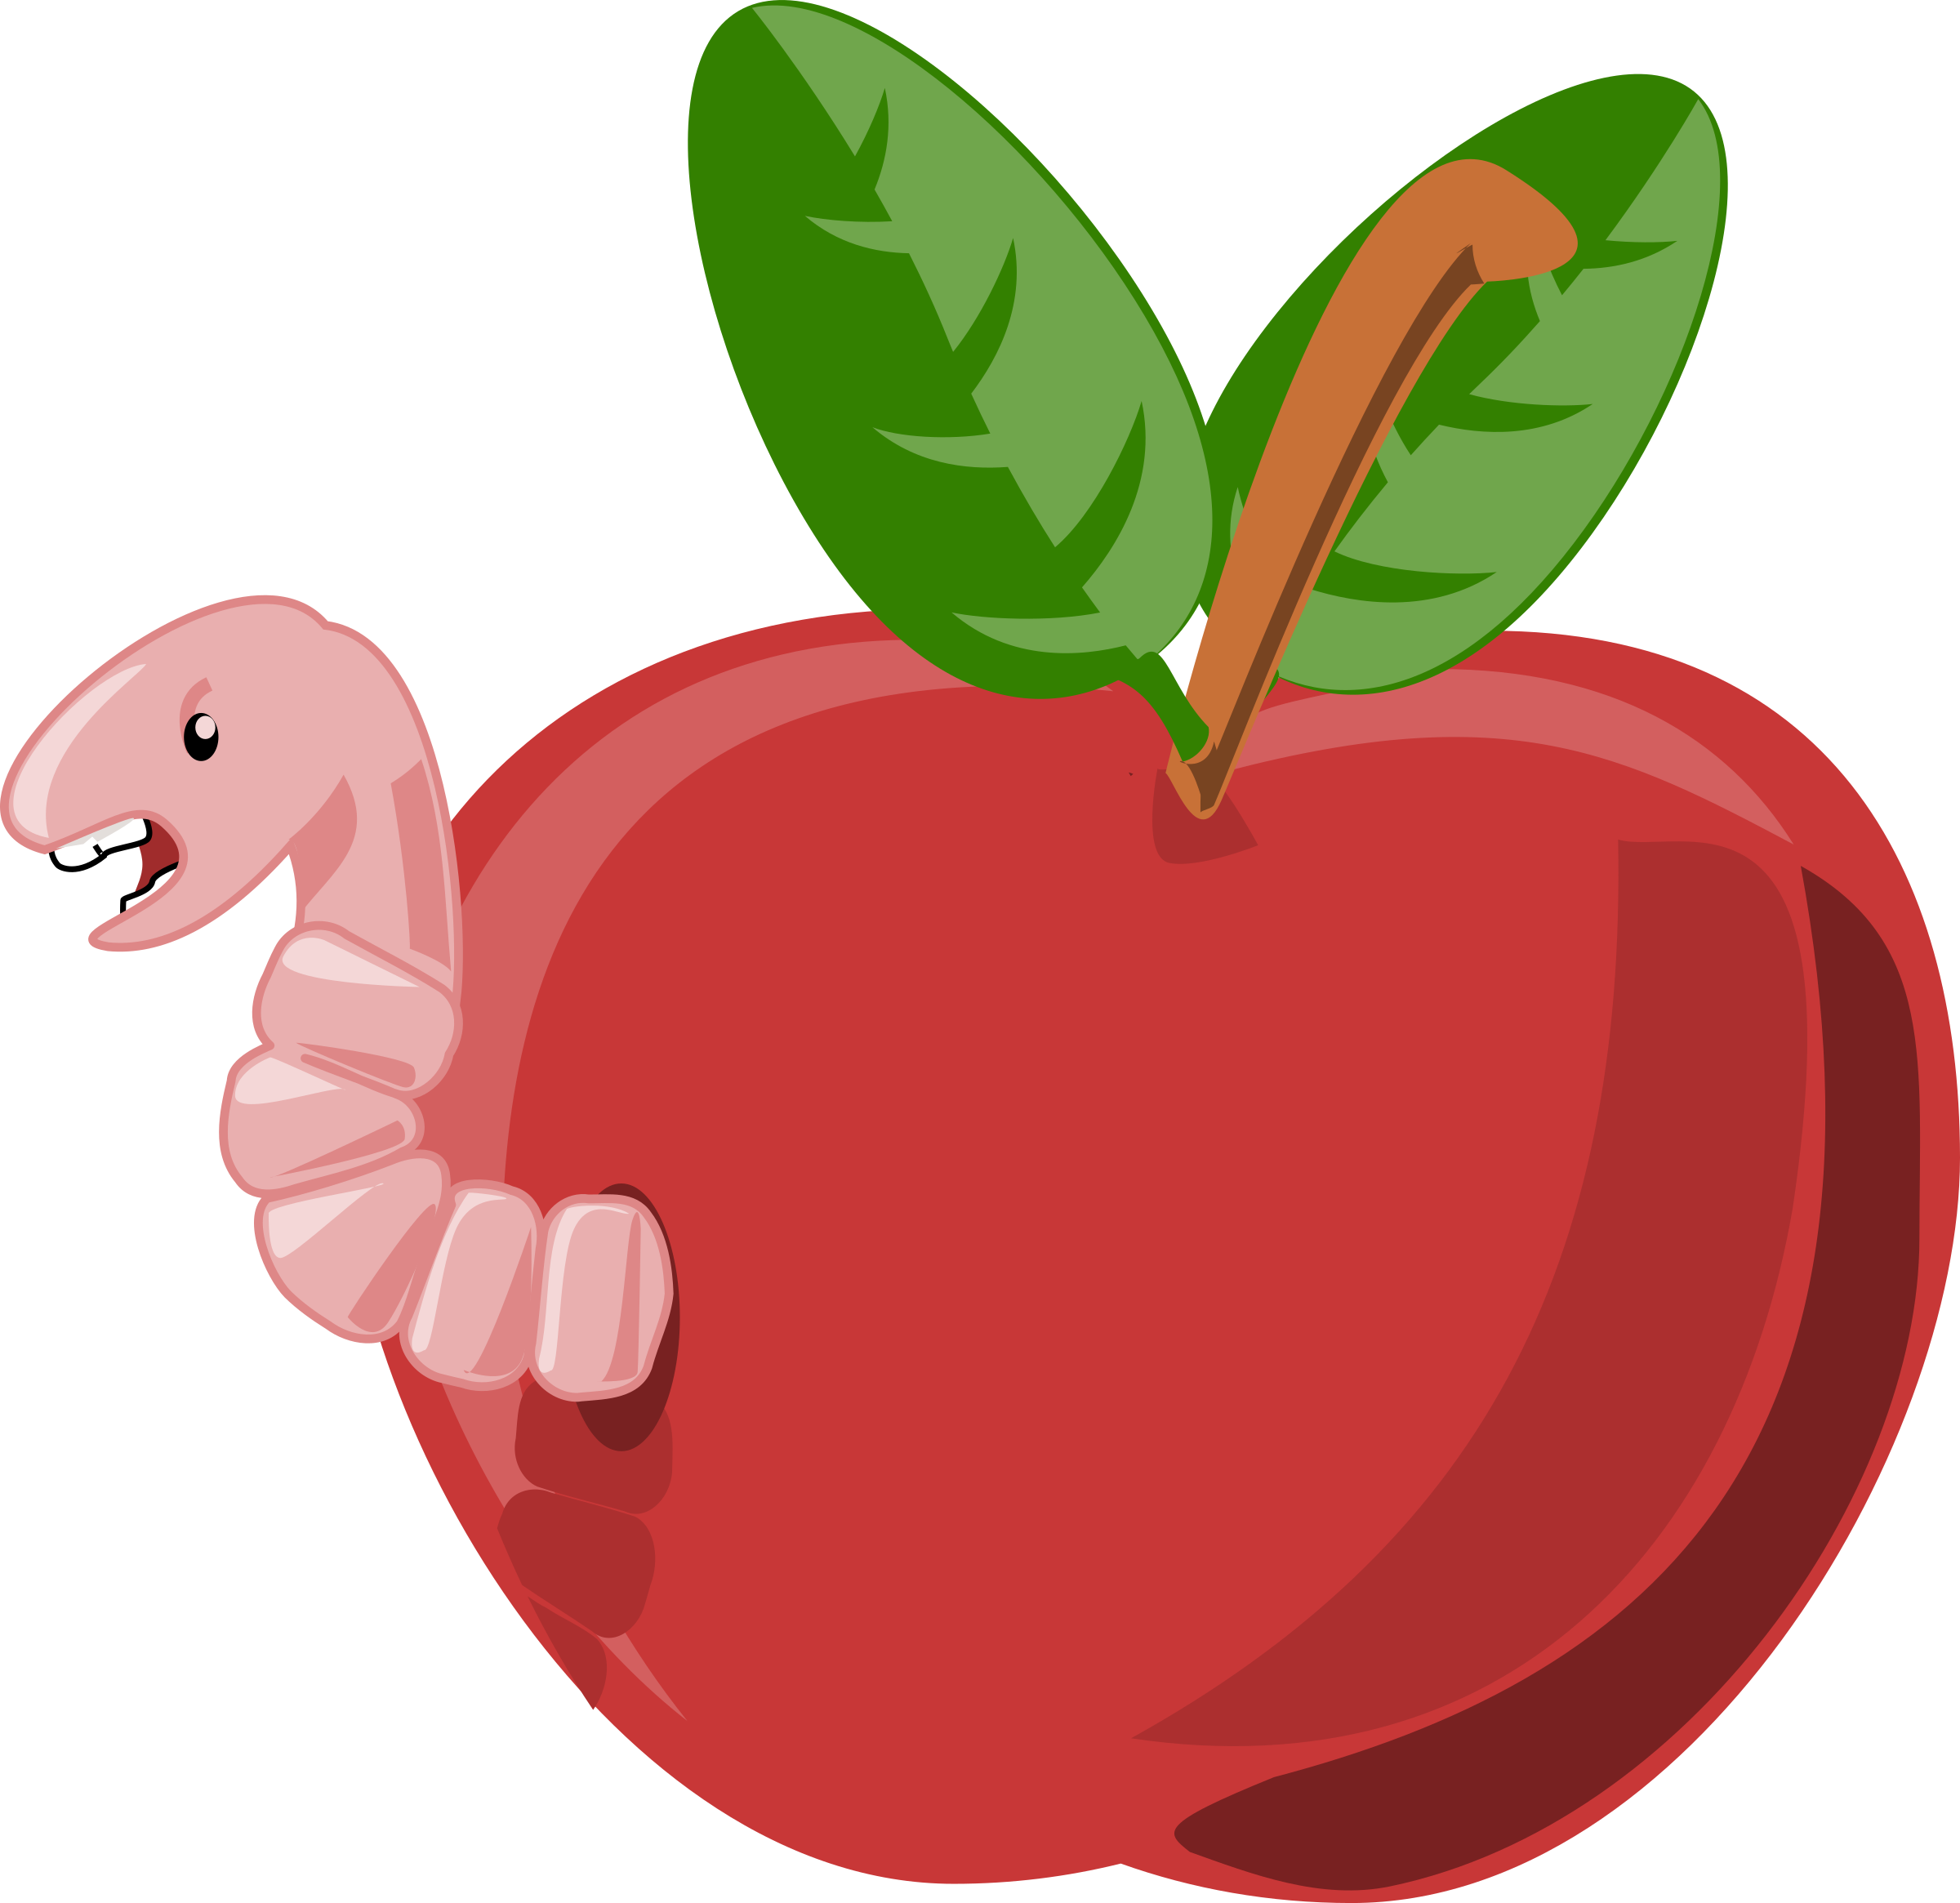 With worm big image. Clipart apple cartoon